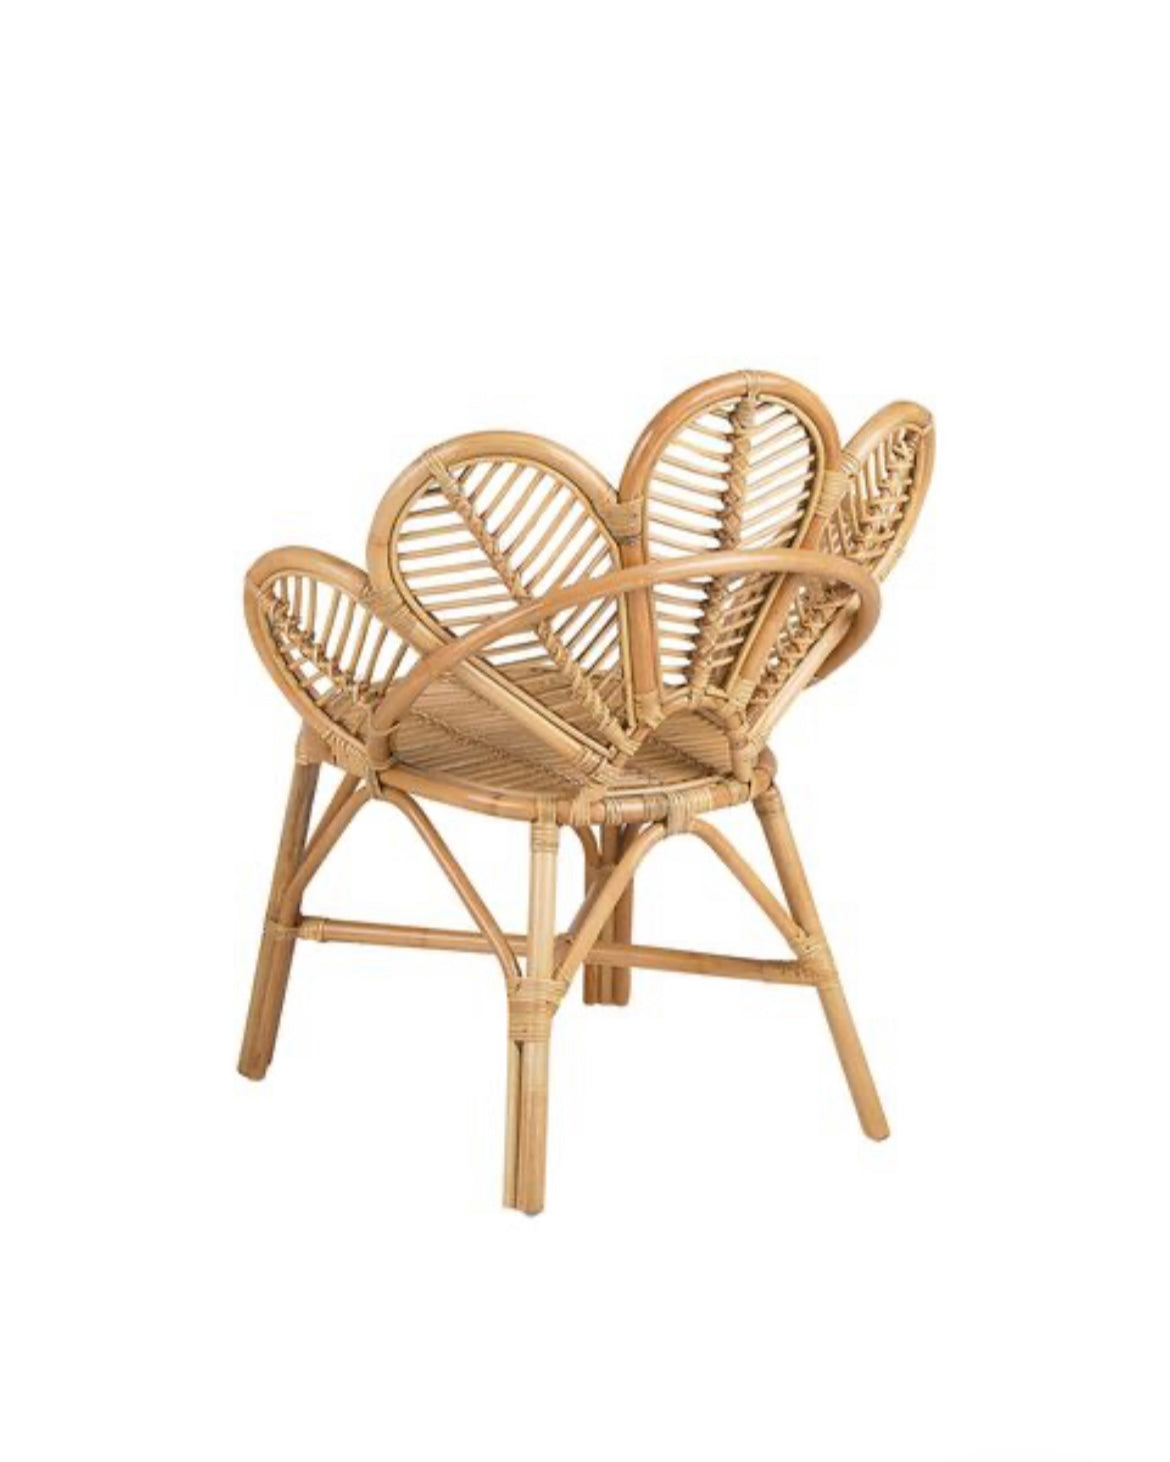 Natural Rattan Chair with Peacock Backrest - Forplanetsake